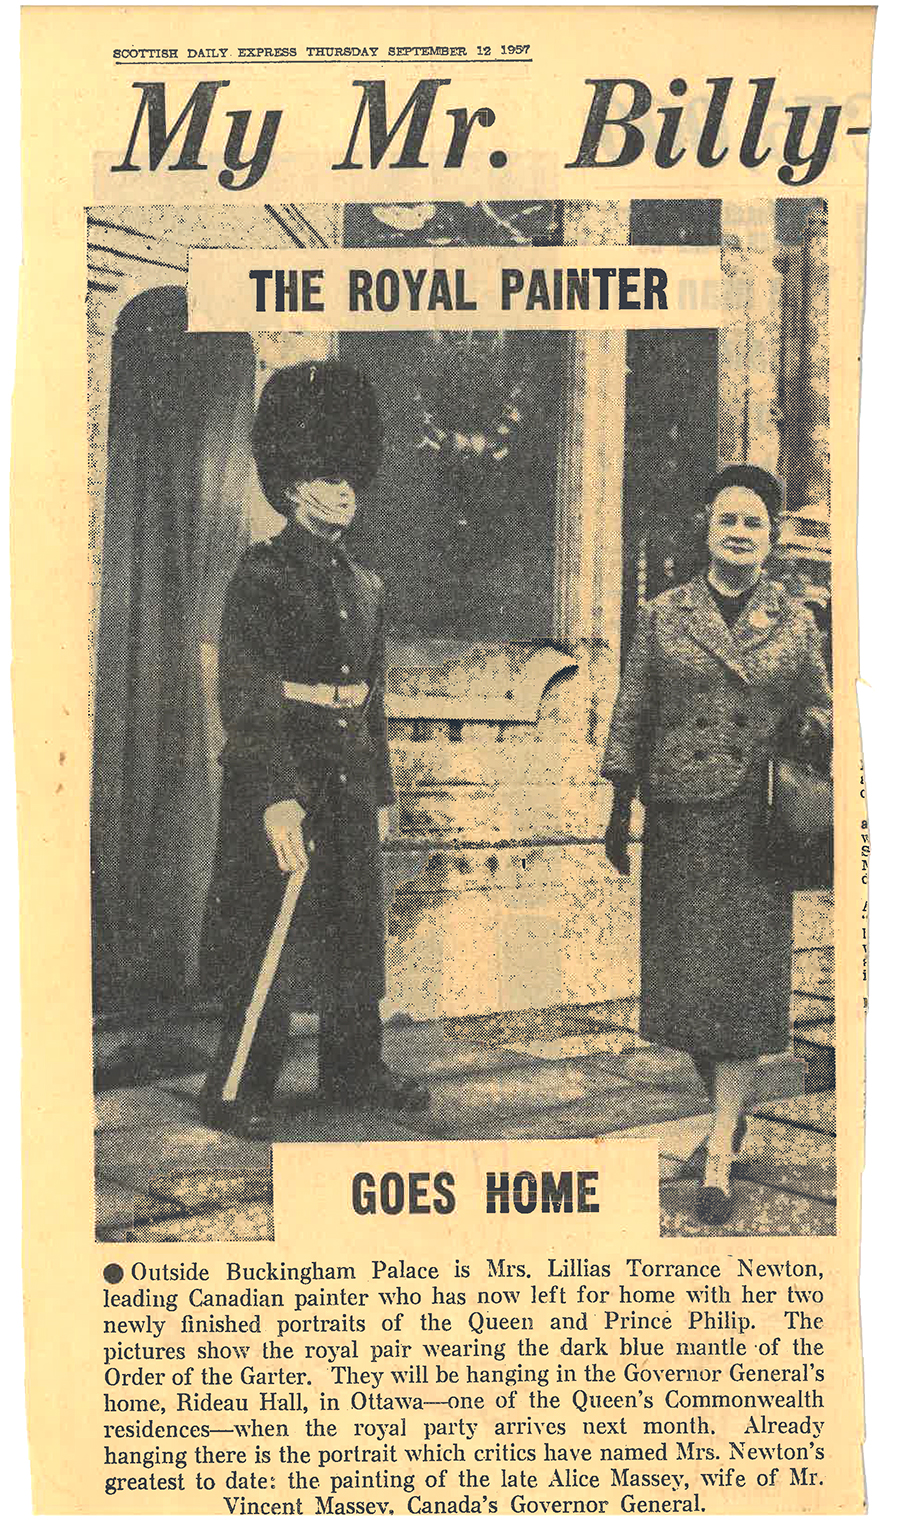 Lilias Torrance Newton’s visit to Buckingham Palace to paint portraits of the Queen and Prince Philip made headlines in 1957, including in this edition of the Scottish Daily Express.